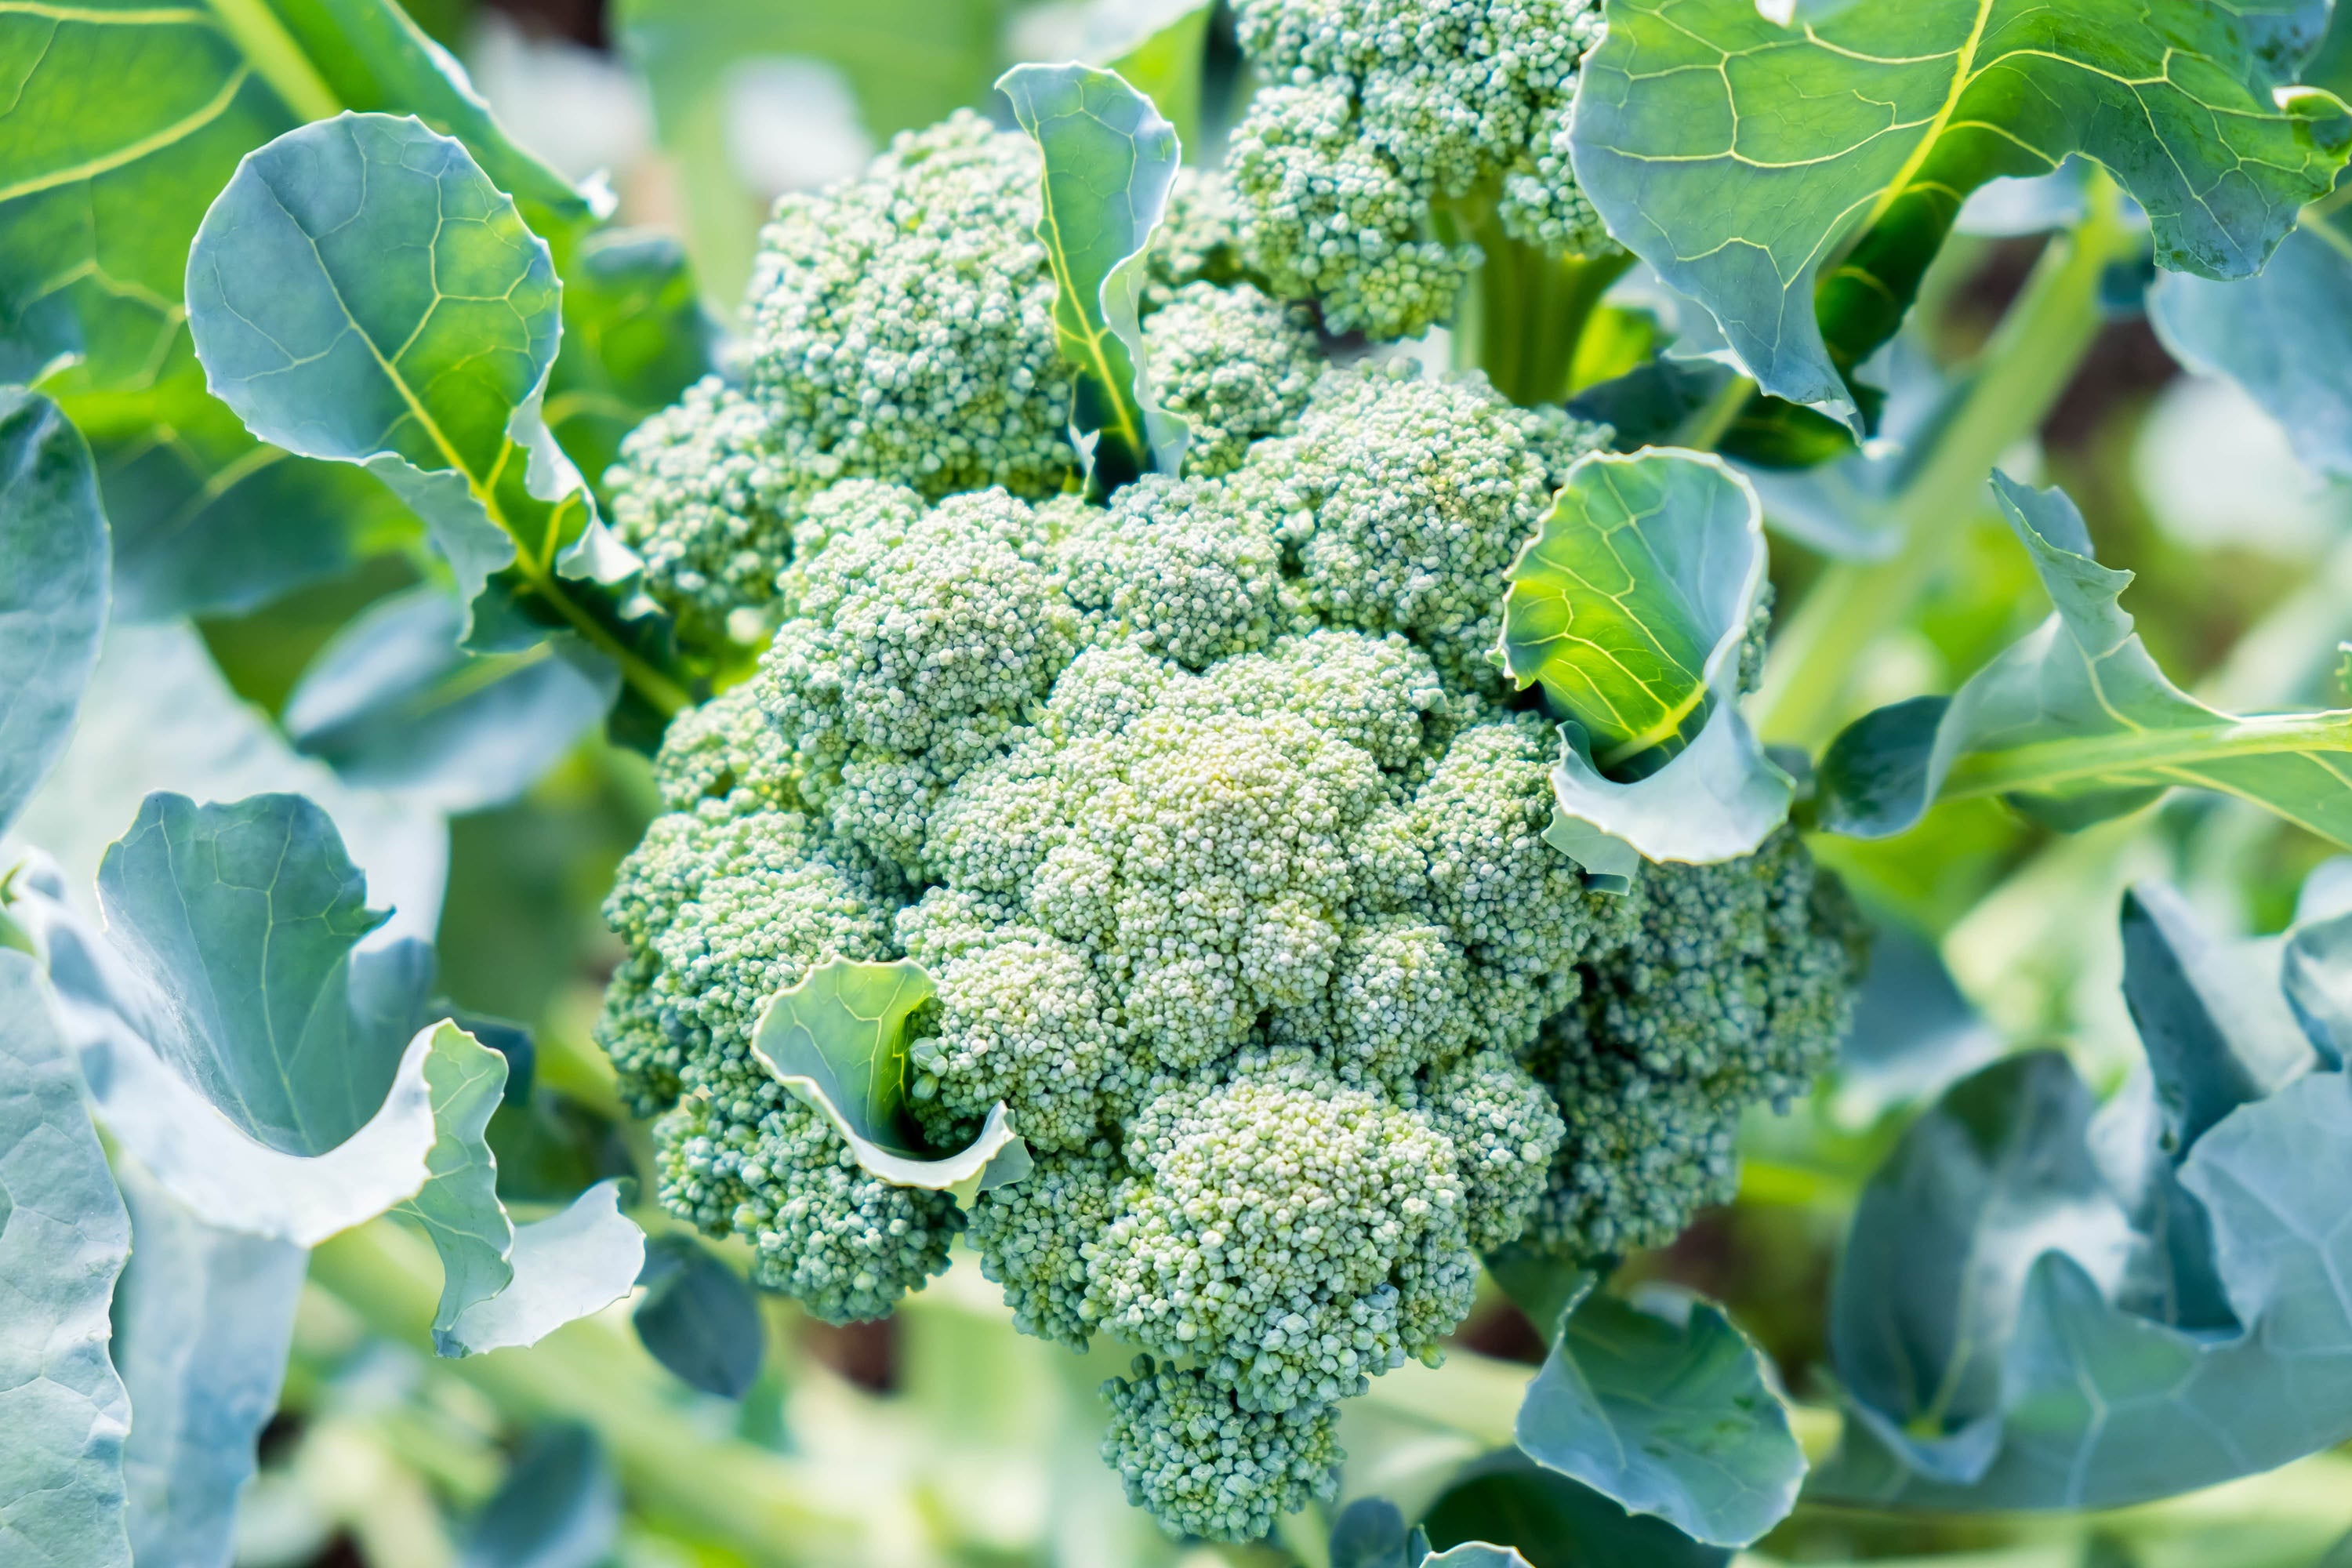 How to Grow Broccoli: 4 Tips You Need to Know For the Best Home-Grown  Broccoli – Sow Right Seeds